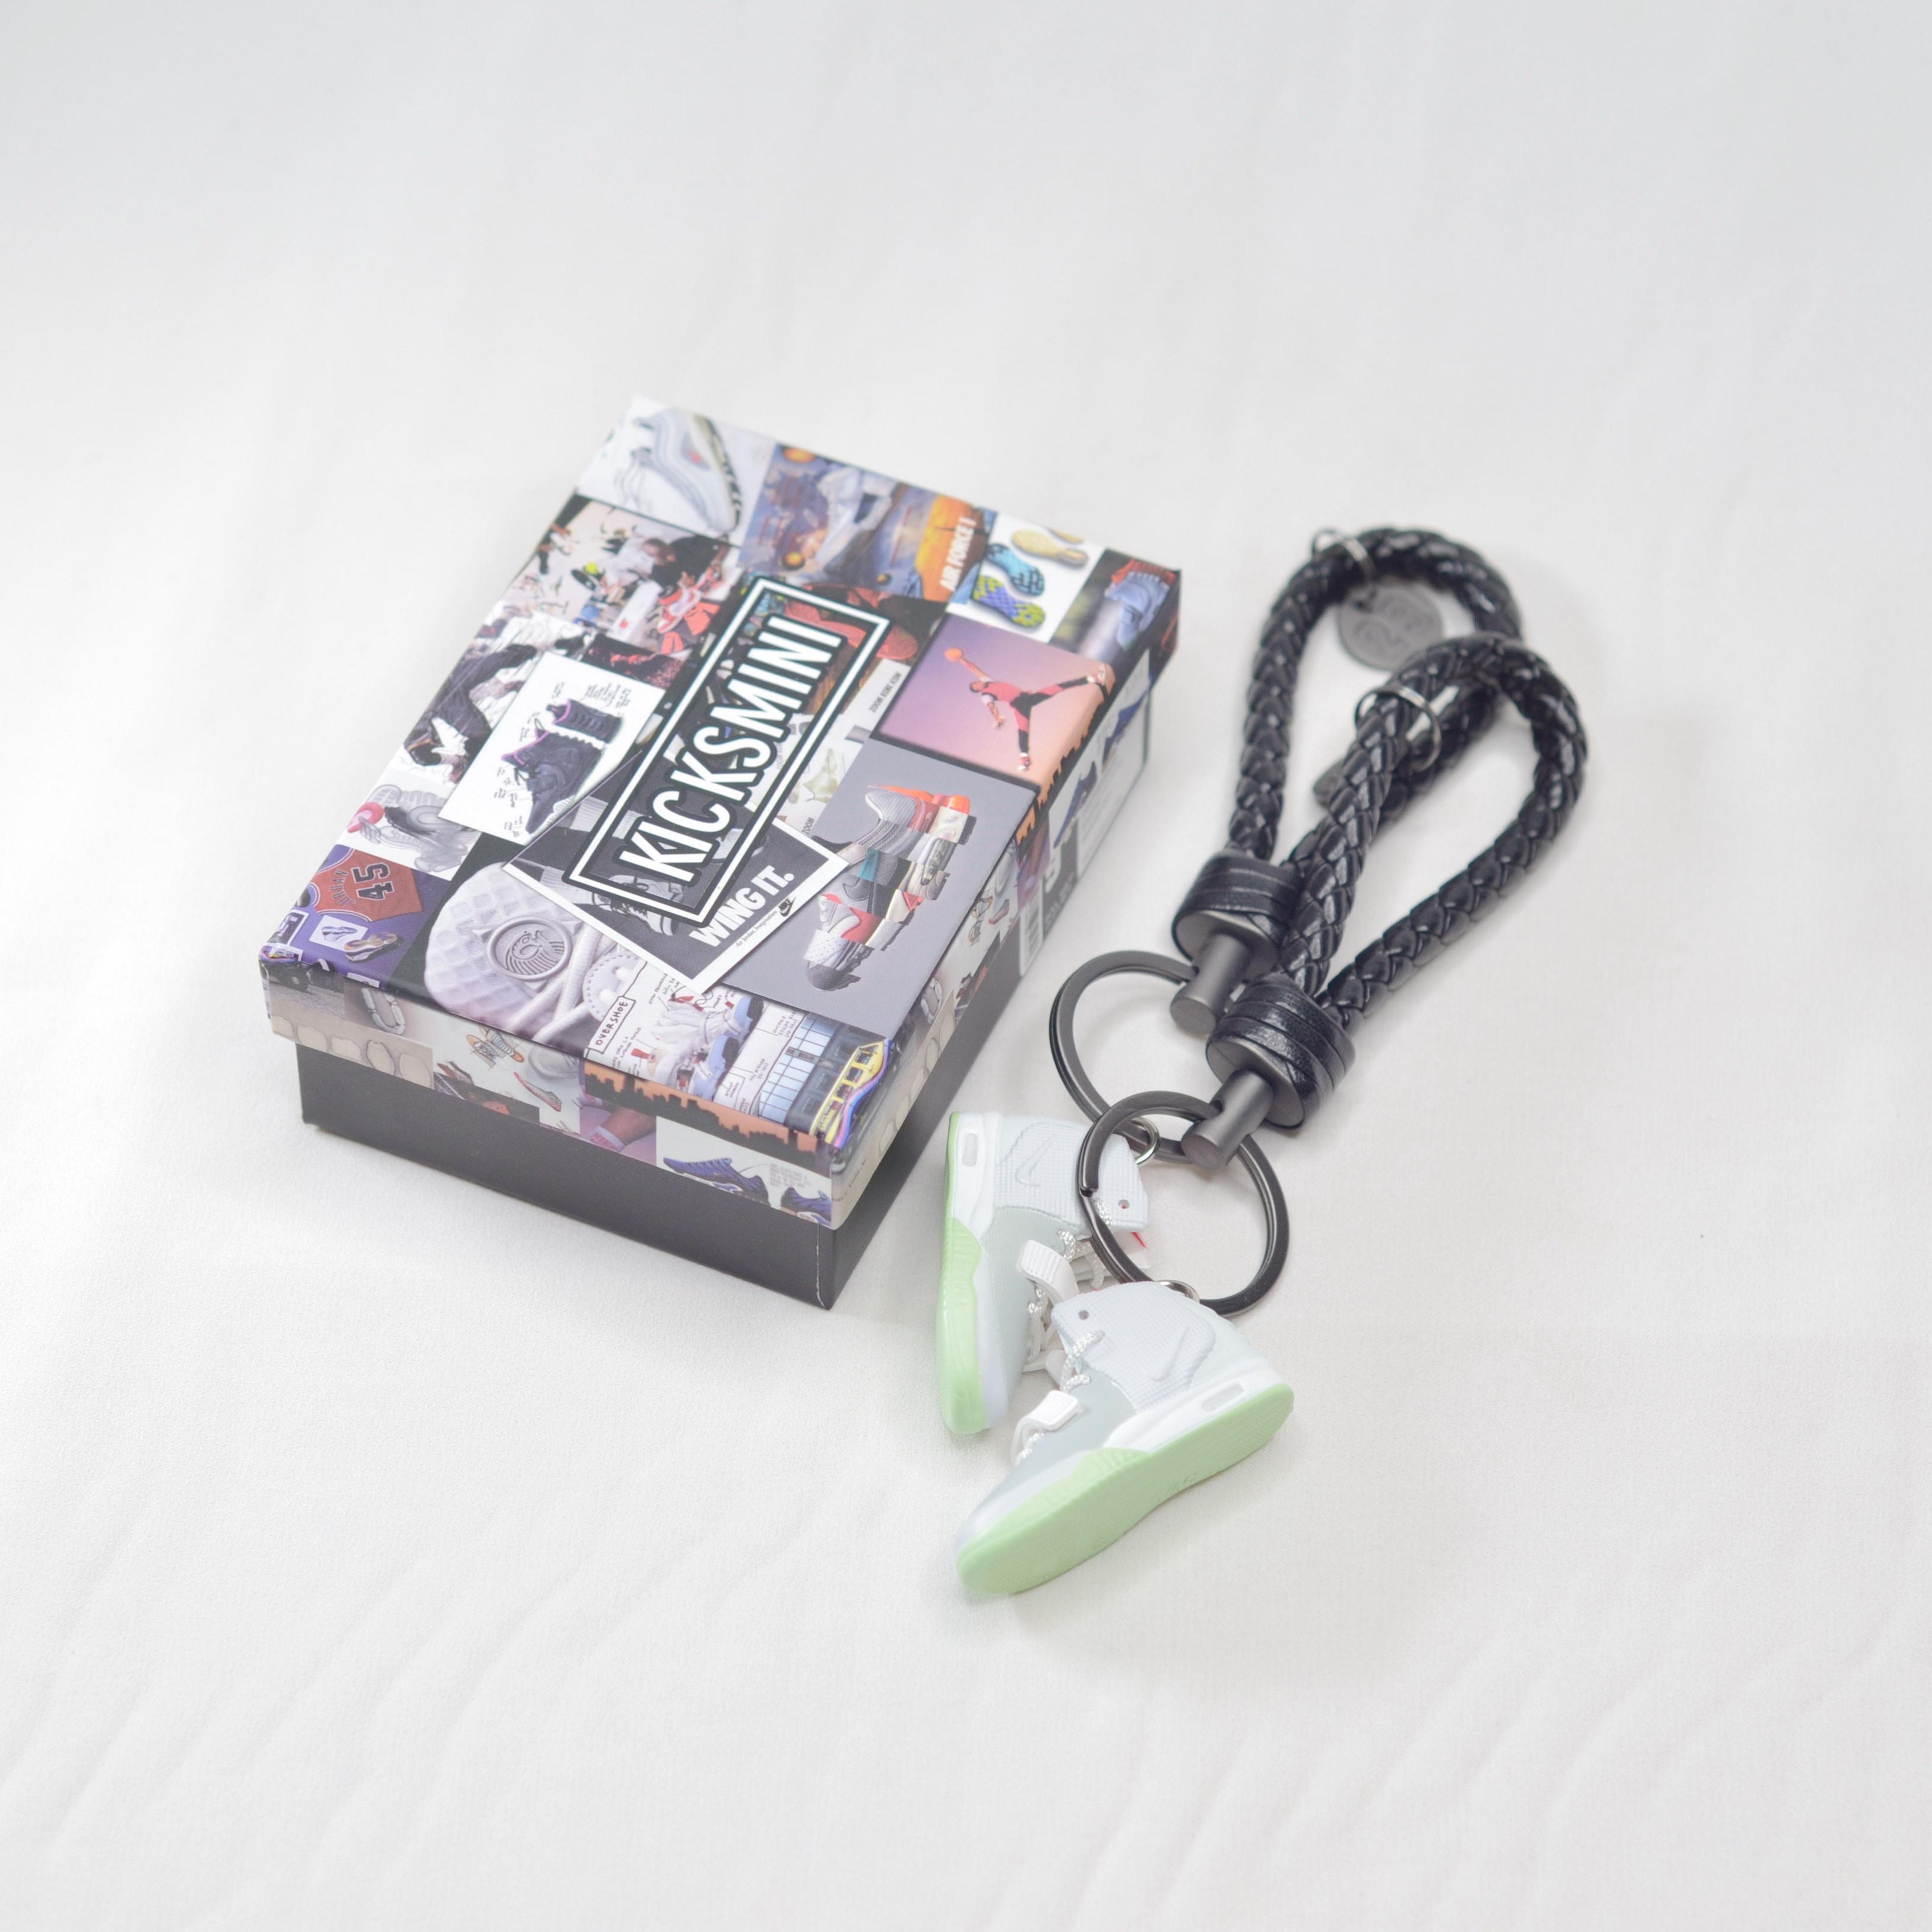 Alternate View 5 of Yeezy/NMD Collaboration 3D Mini Sneakers Keychain with BV Rope/B